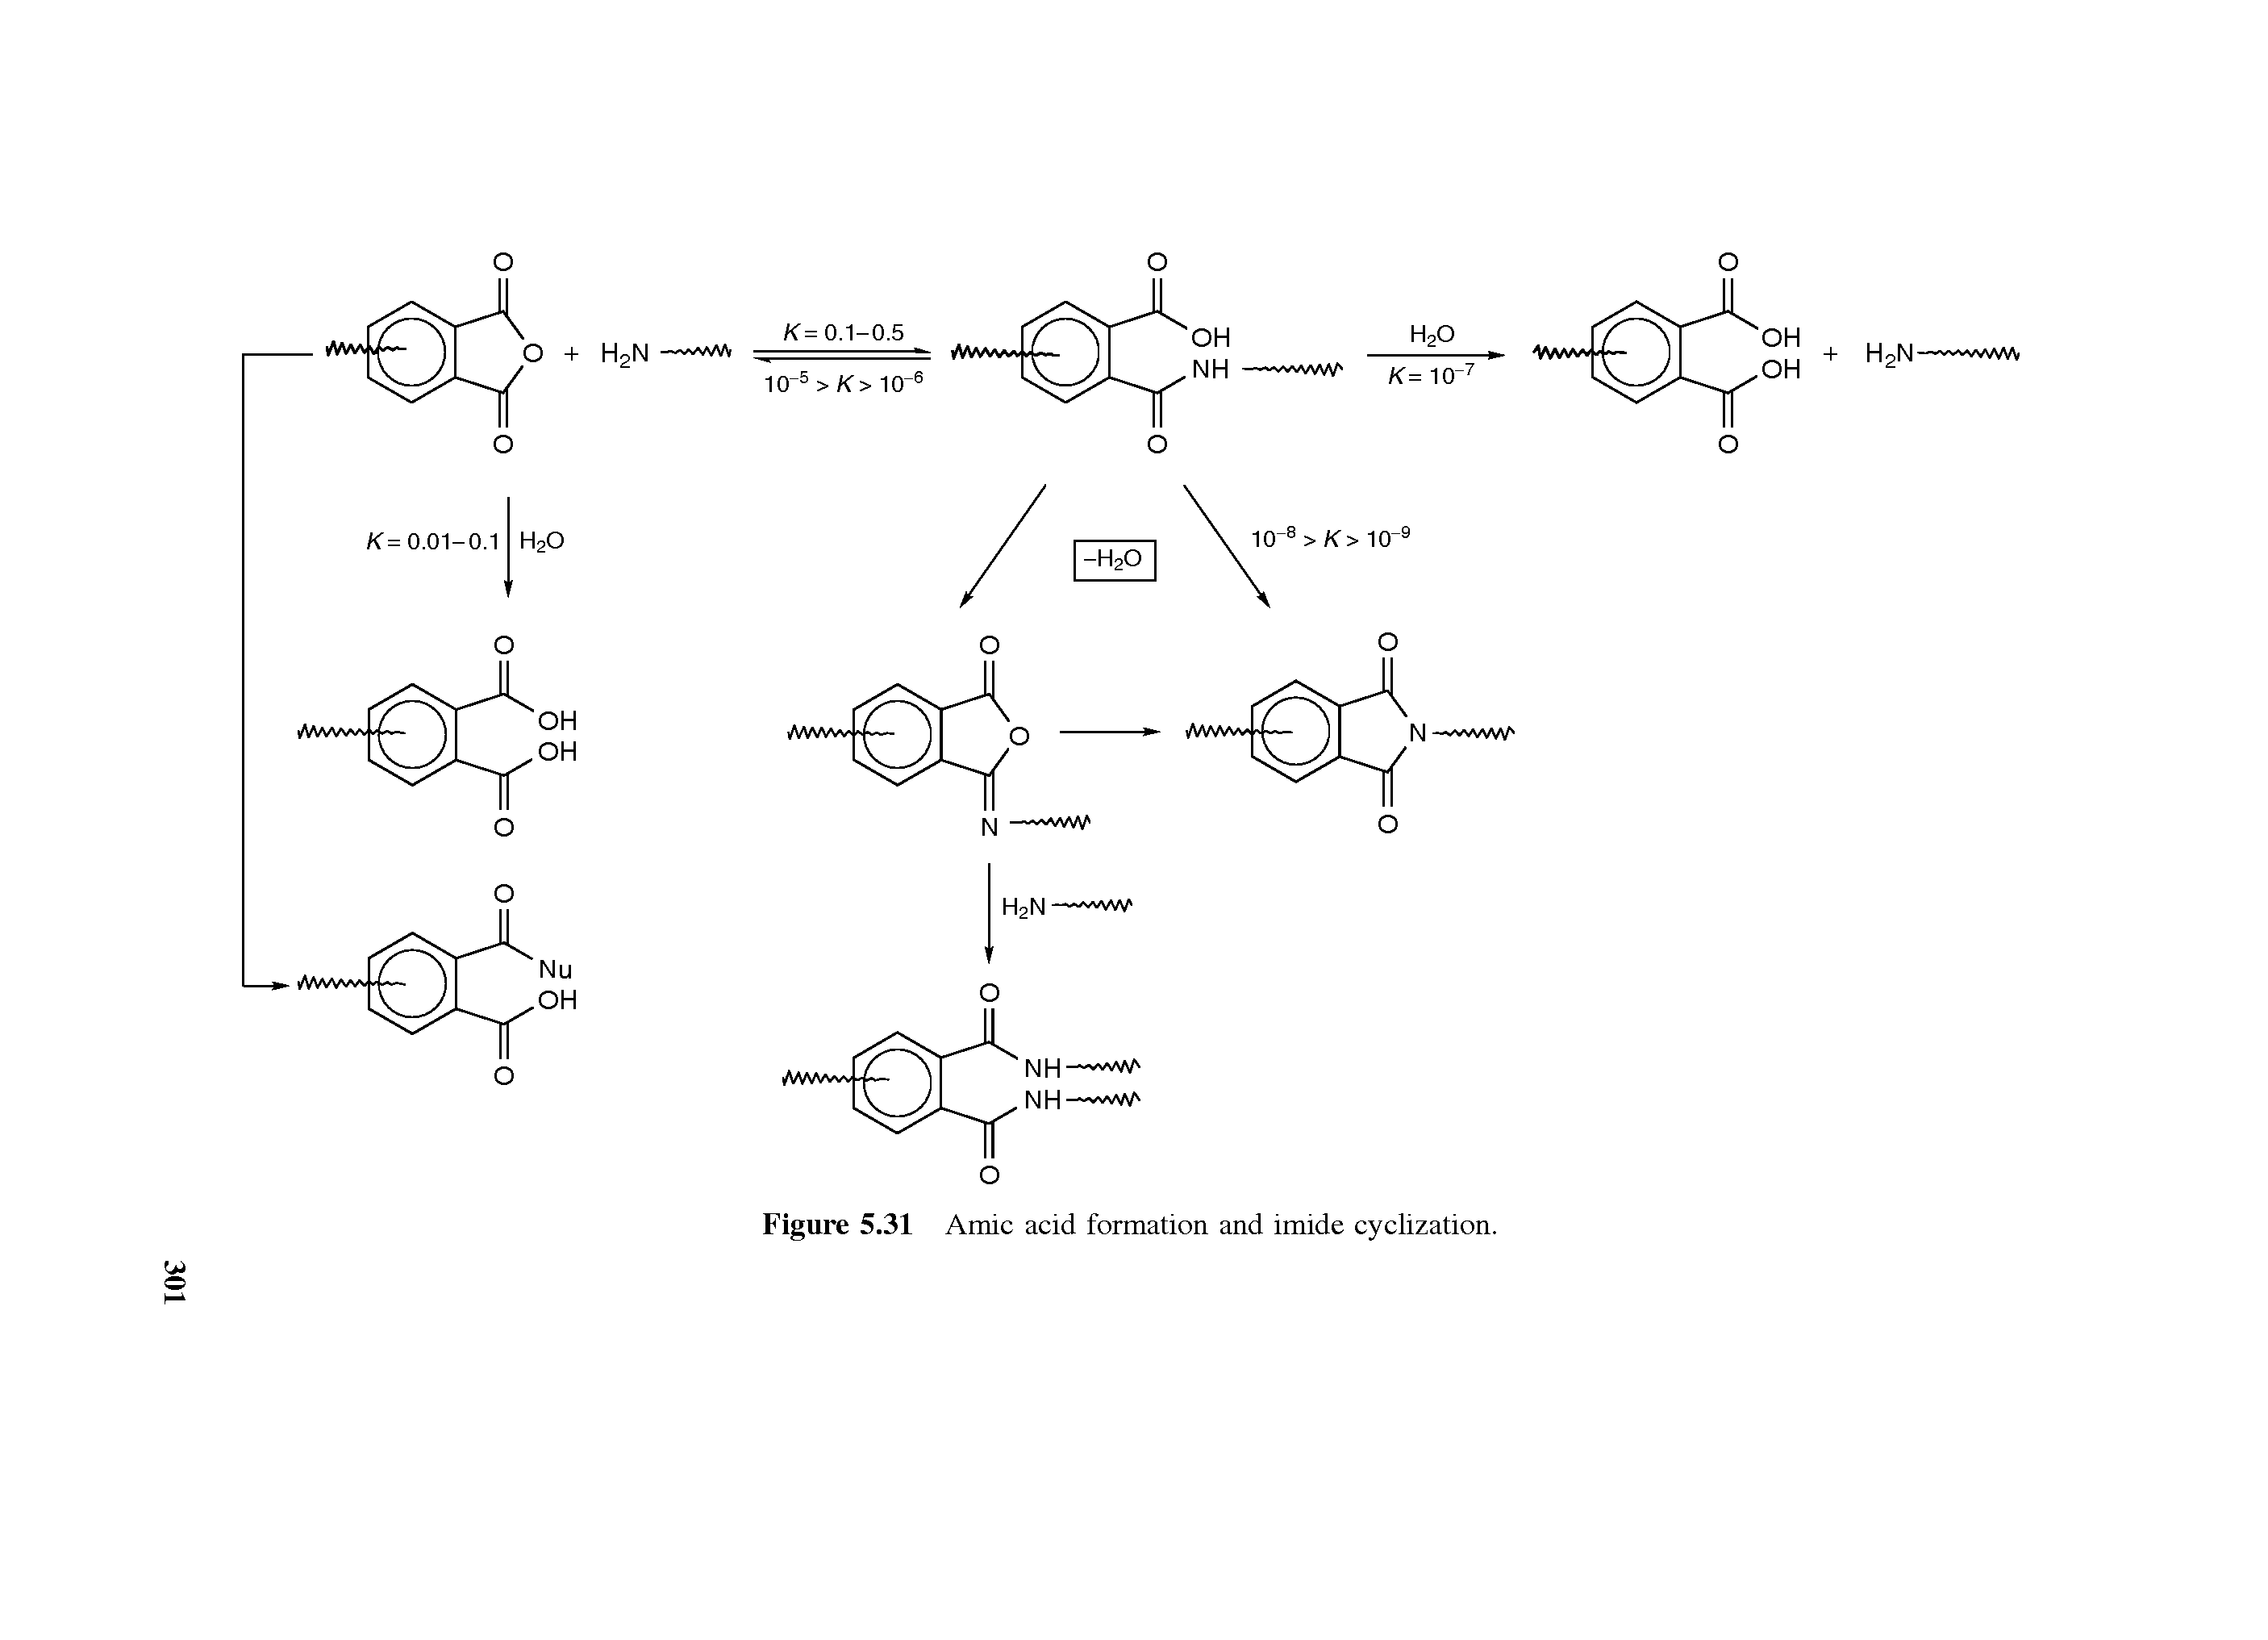 Figure 5.31 Amic acid formation and imide cyclization.